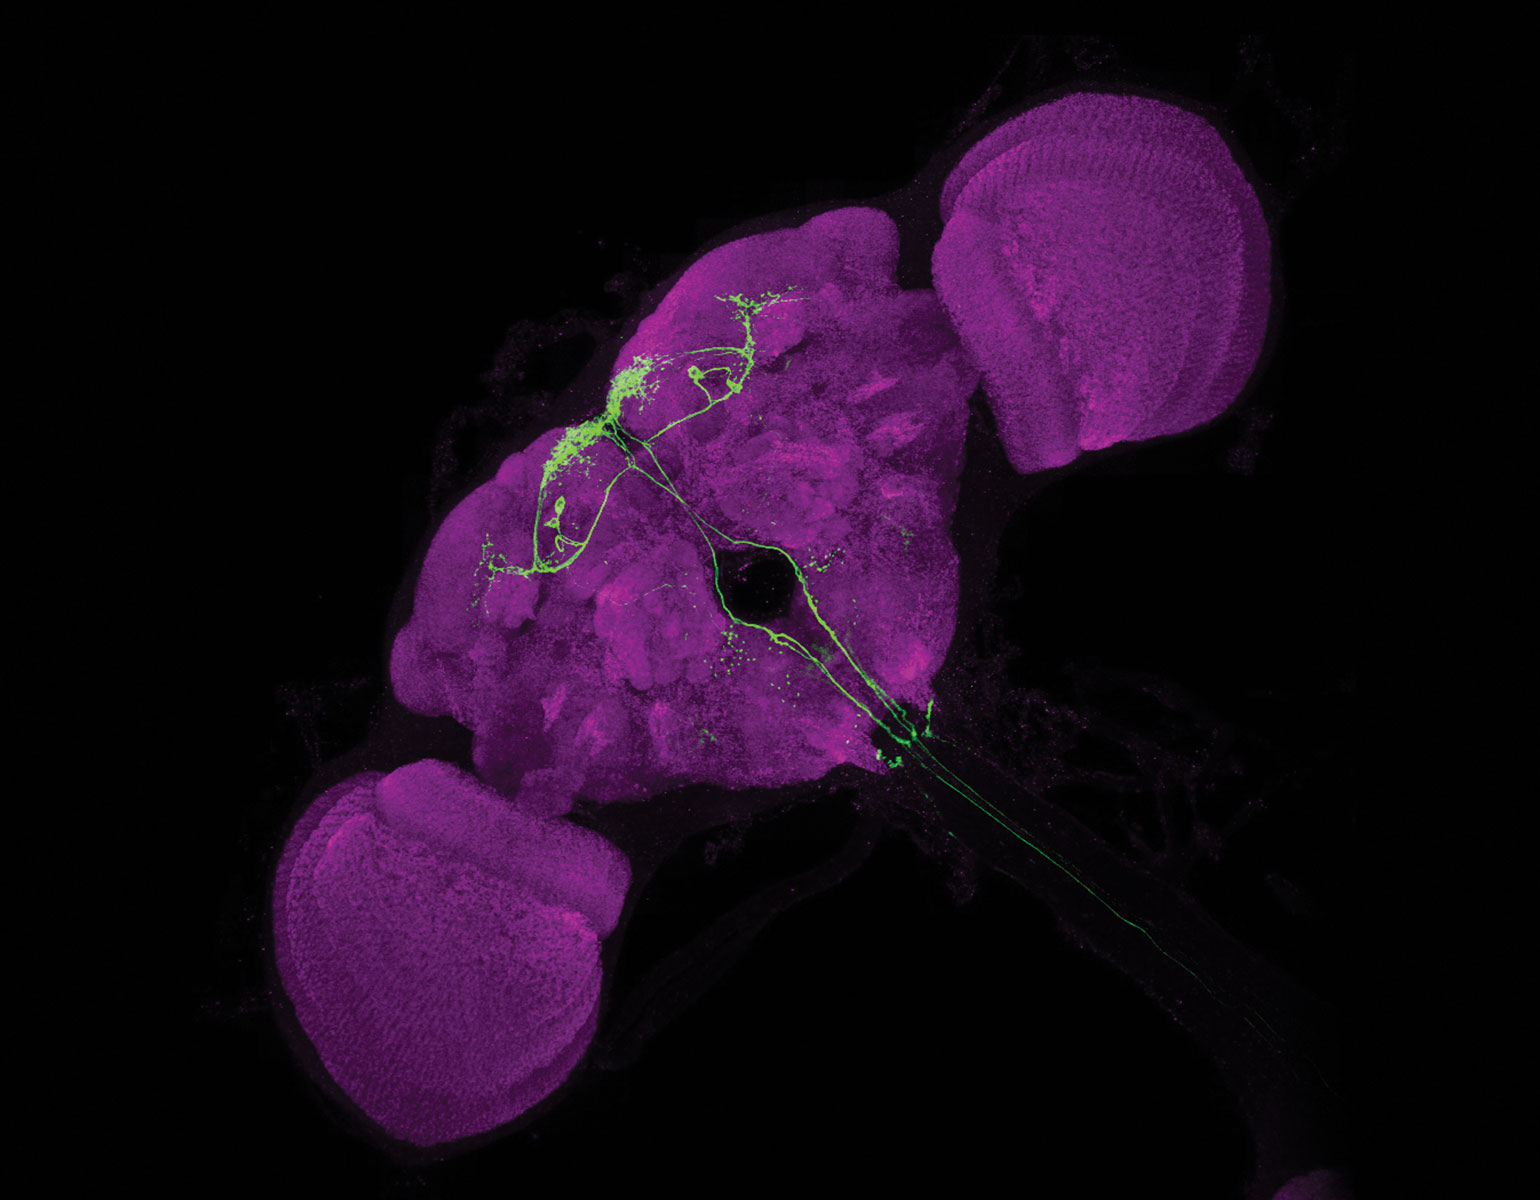 Egg-laying neurons (in green) light up as a fruit fly makes a decision.